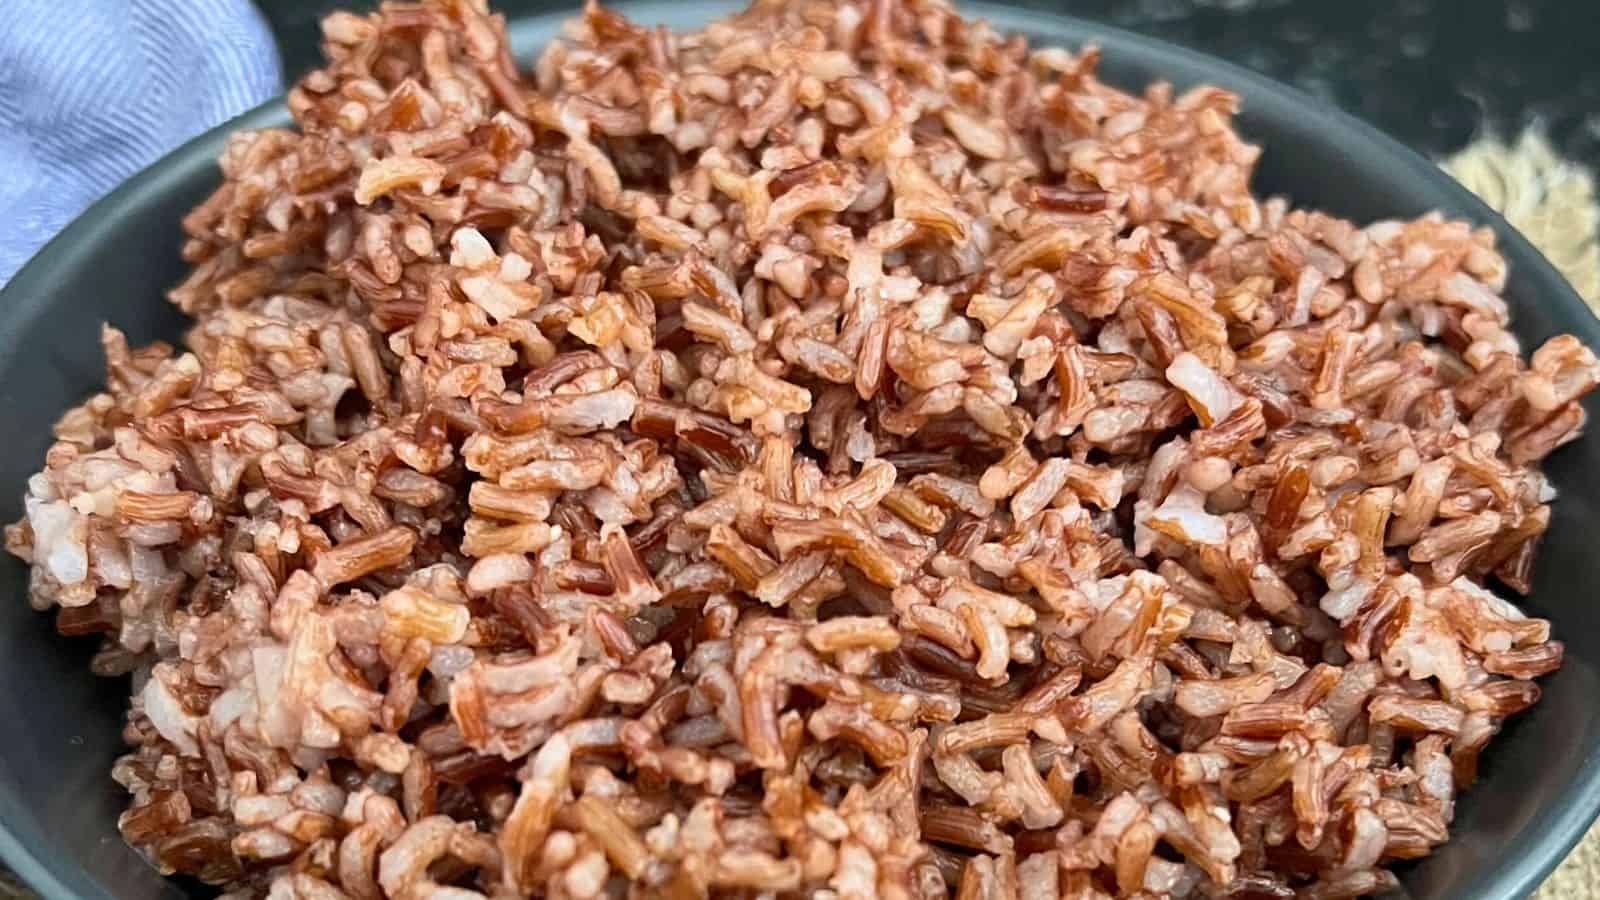 A bowl of Red Rice displayed close-up.